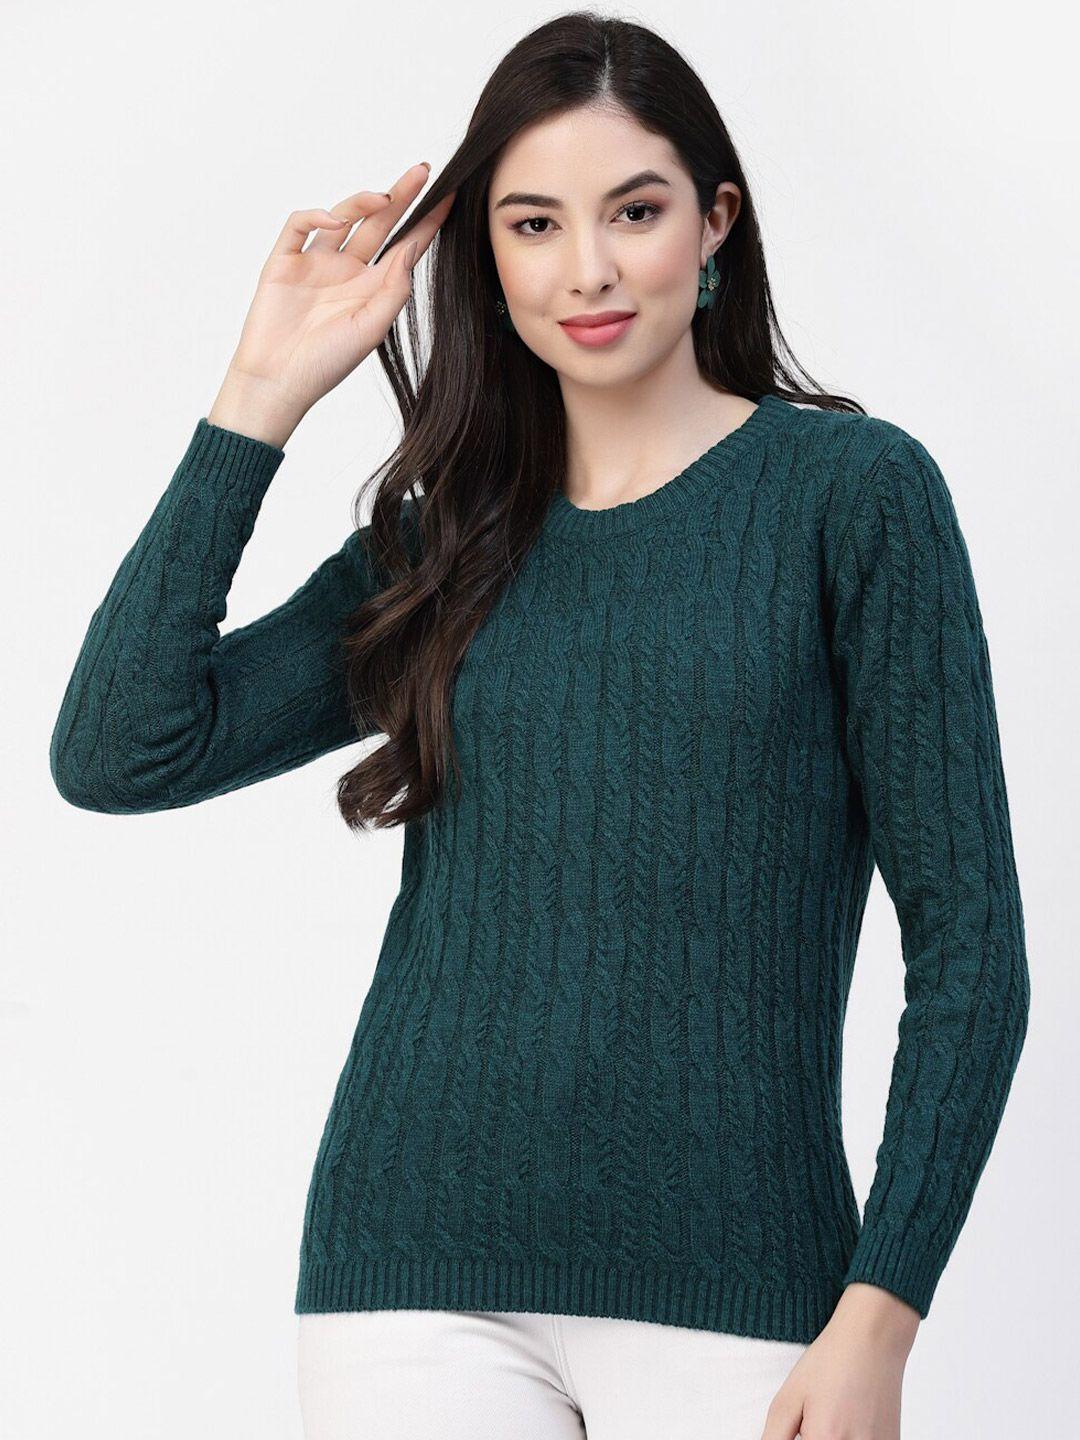 kalt-round-neck-cable-knit-acrylic-sweater